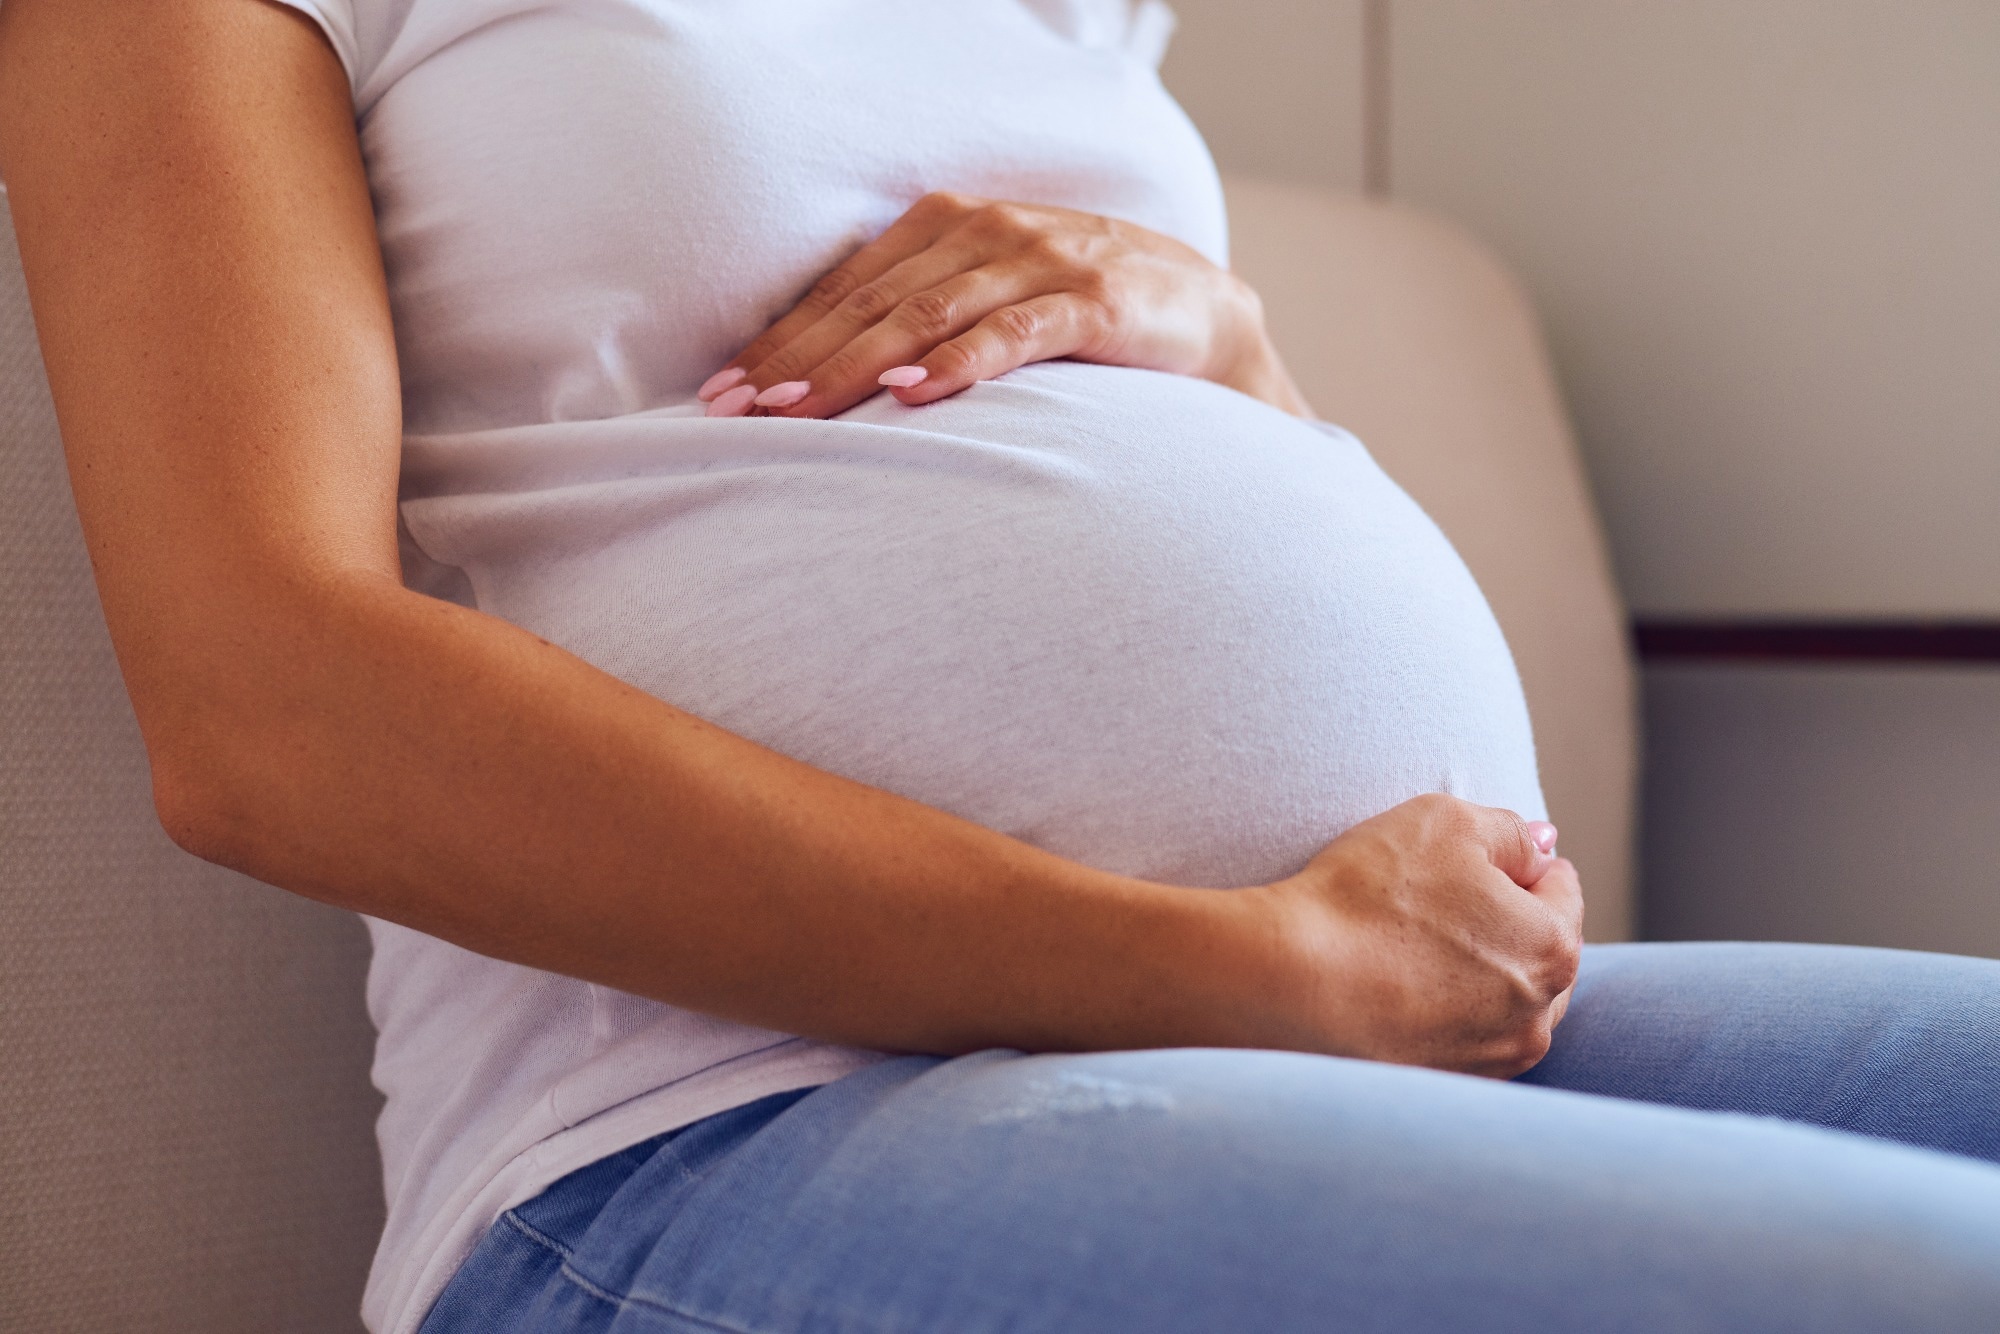 Study: The maternal gut microbiome in pregnancy: implications for the developing immune system. Image Credit: ArtFamily / Shutterstock.com